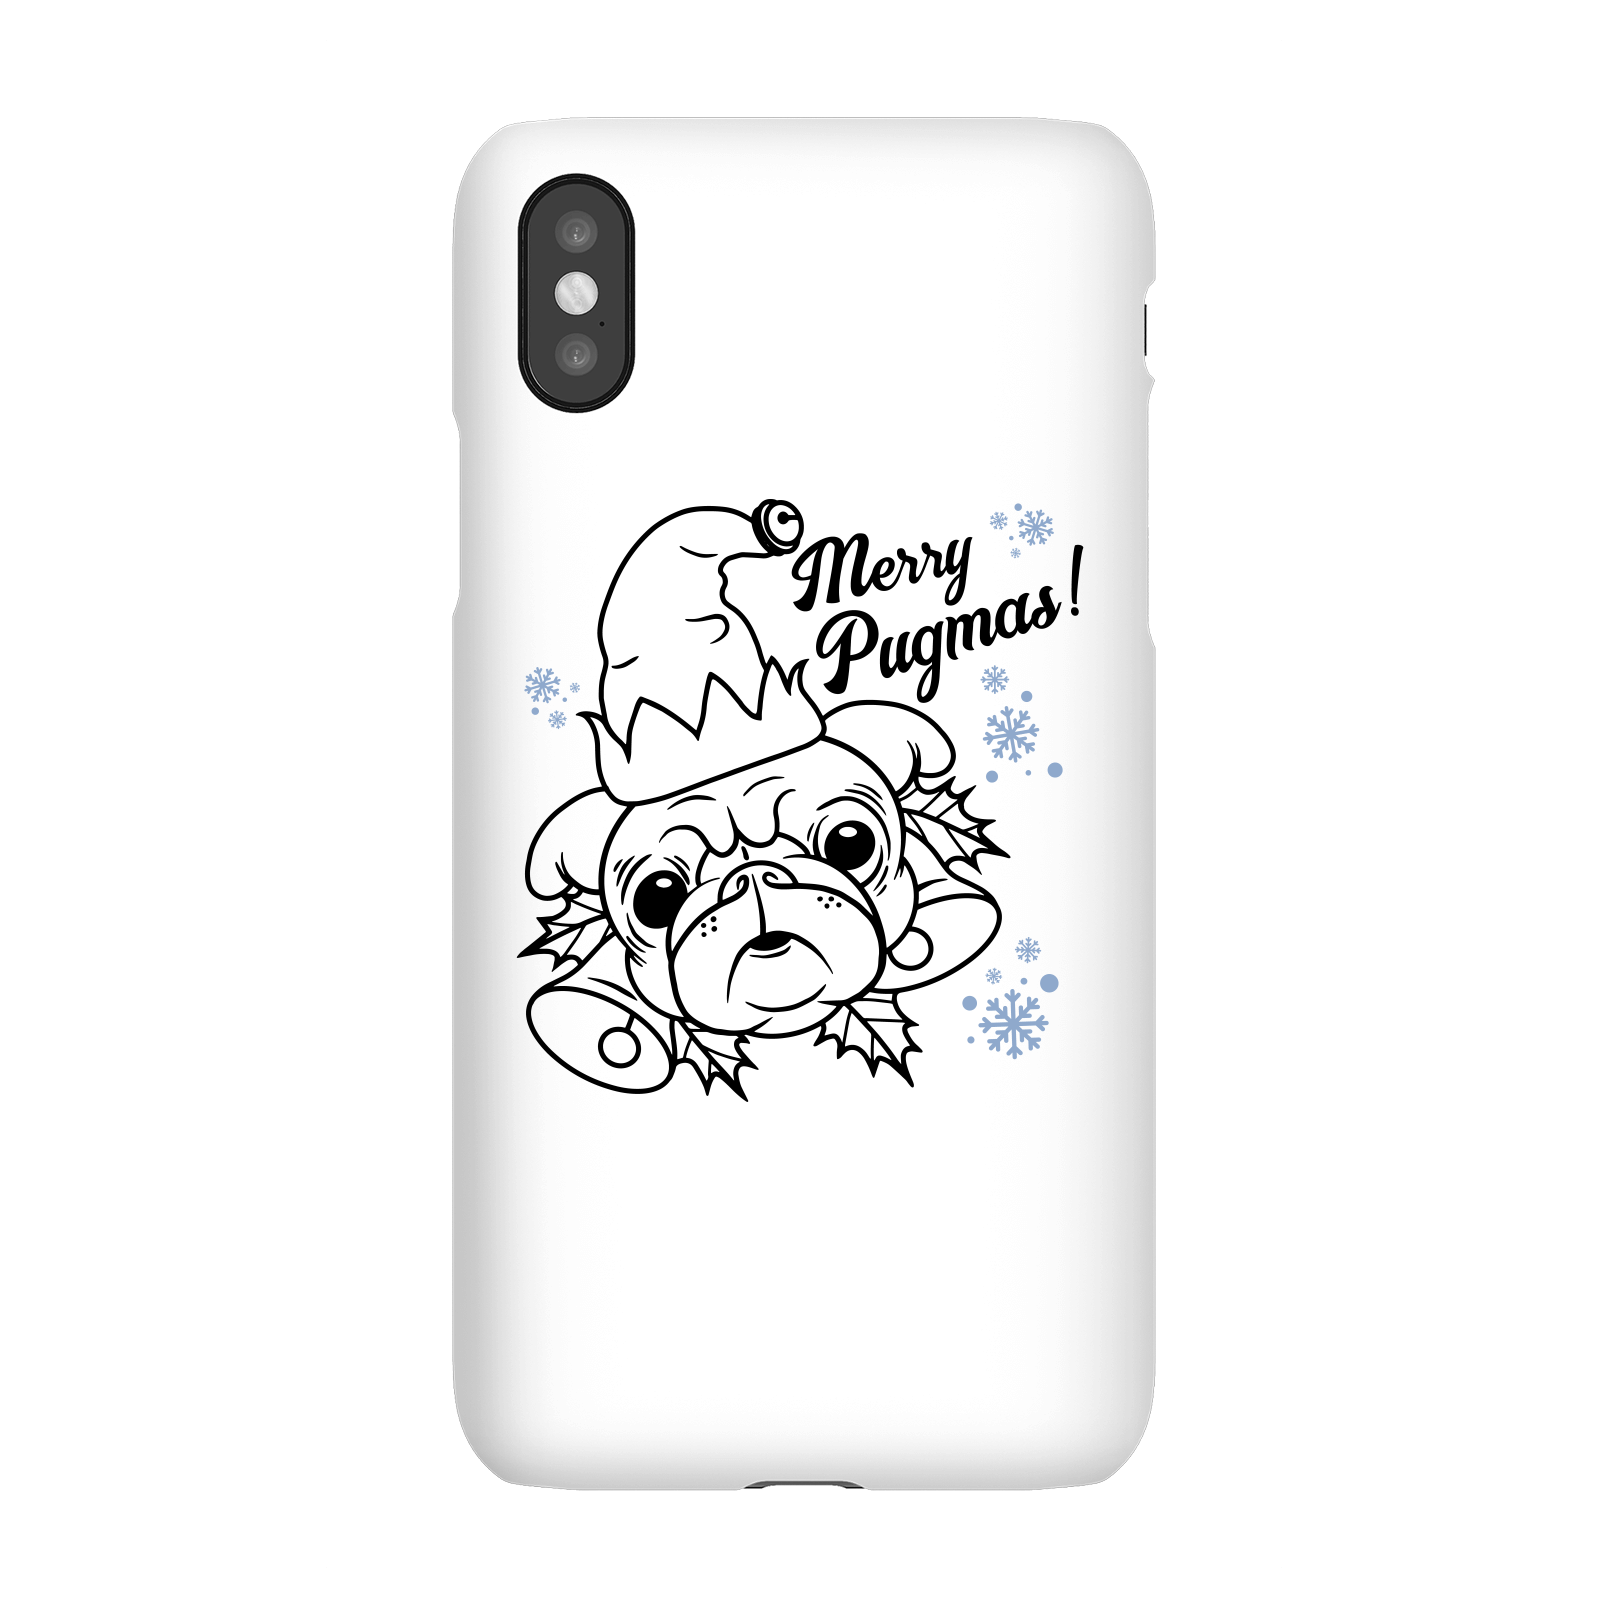 Pugmas! Phone Case for iPhone and Android - iPhone 5/5s - Snap Case - Matte